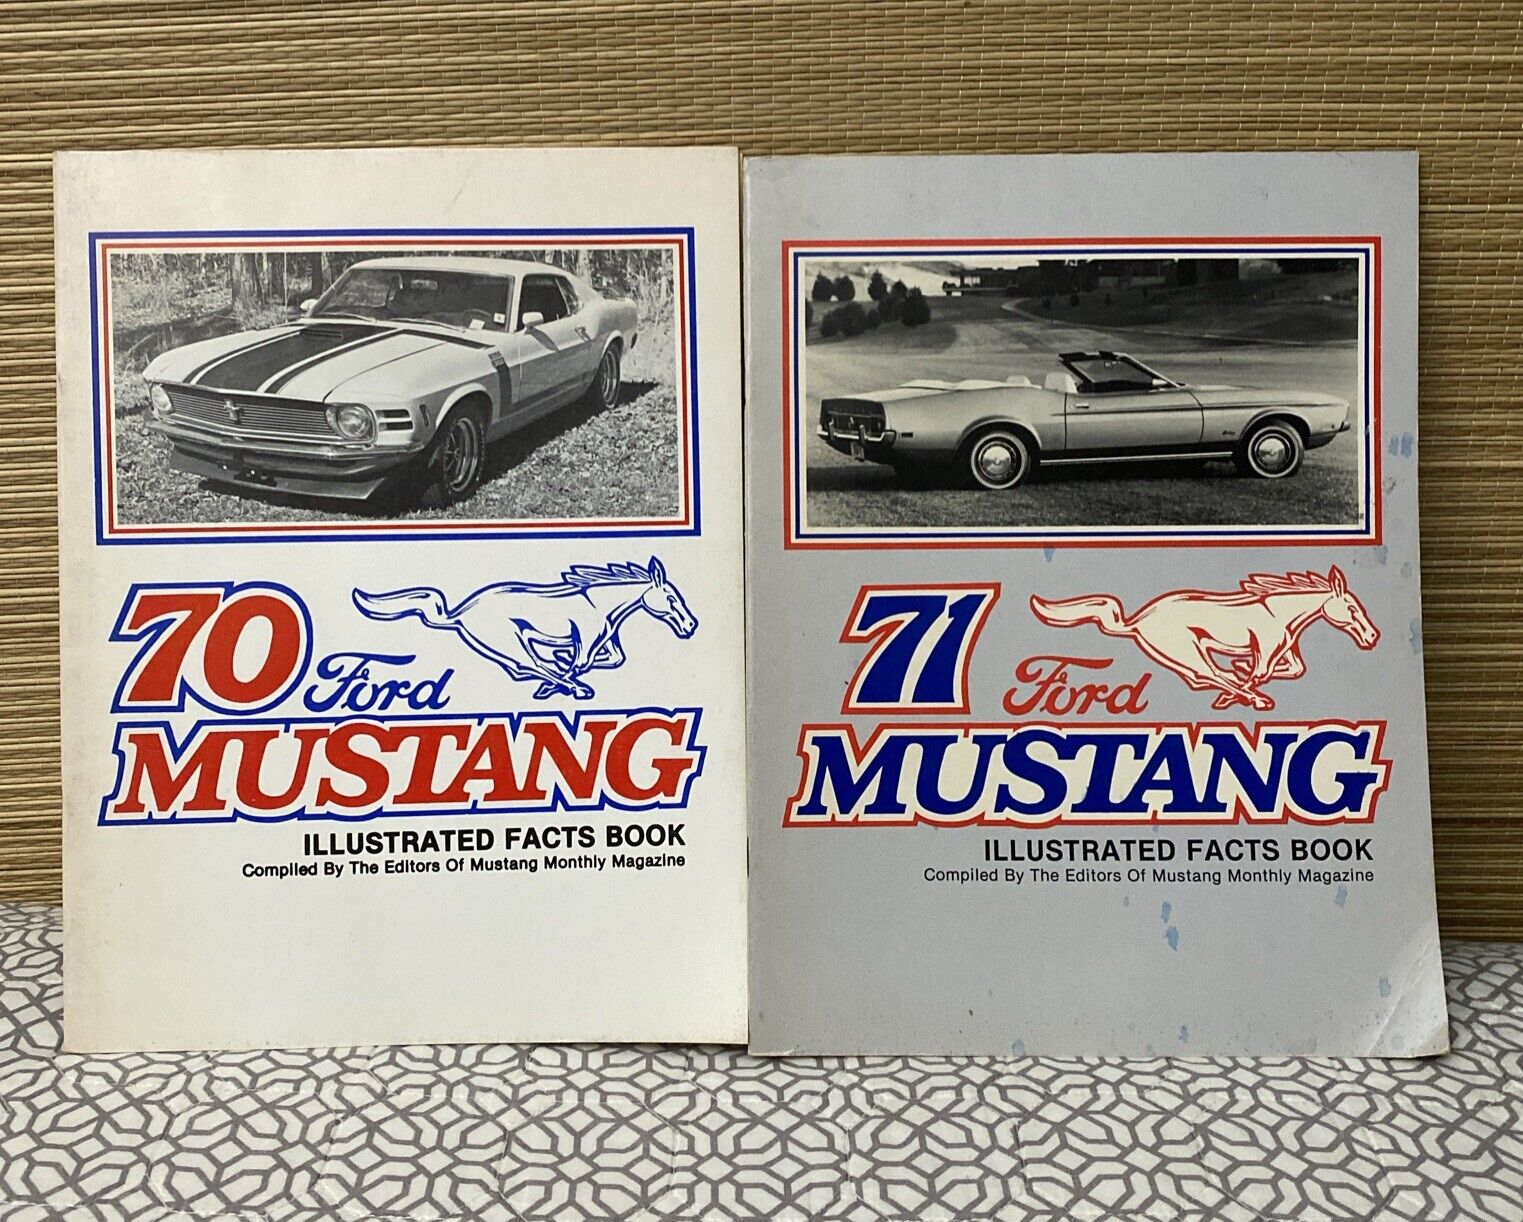 1970 & 1971 Ford Mustang Illustrated Facts Books (2 Book Lot)